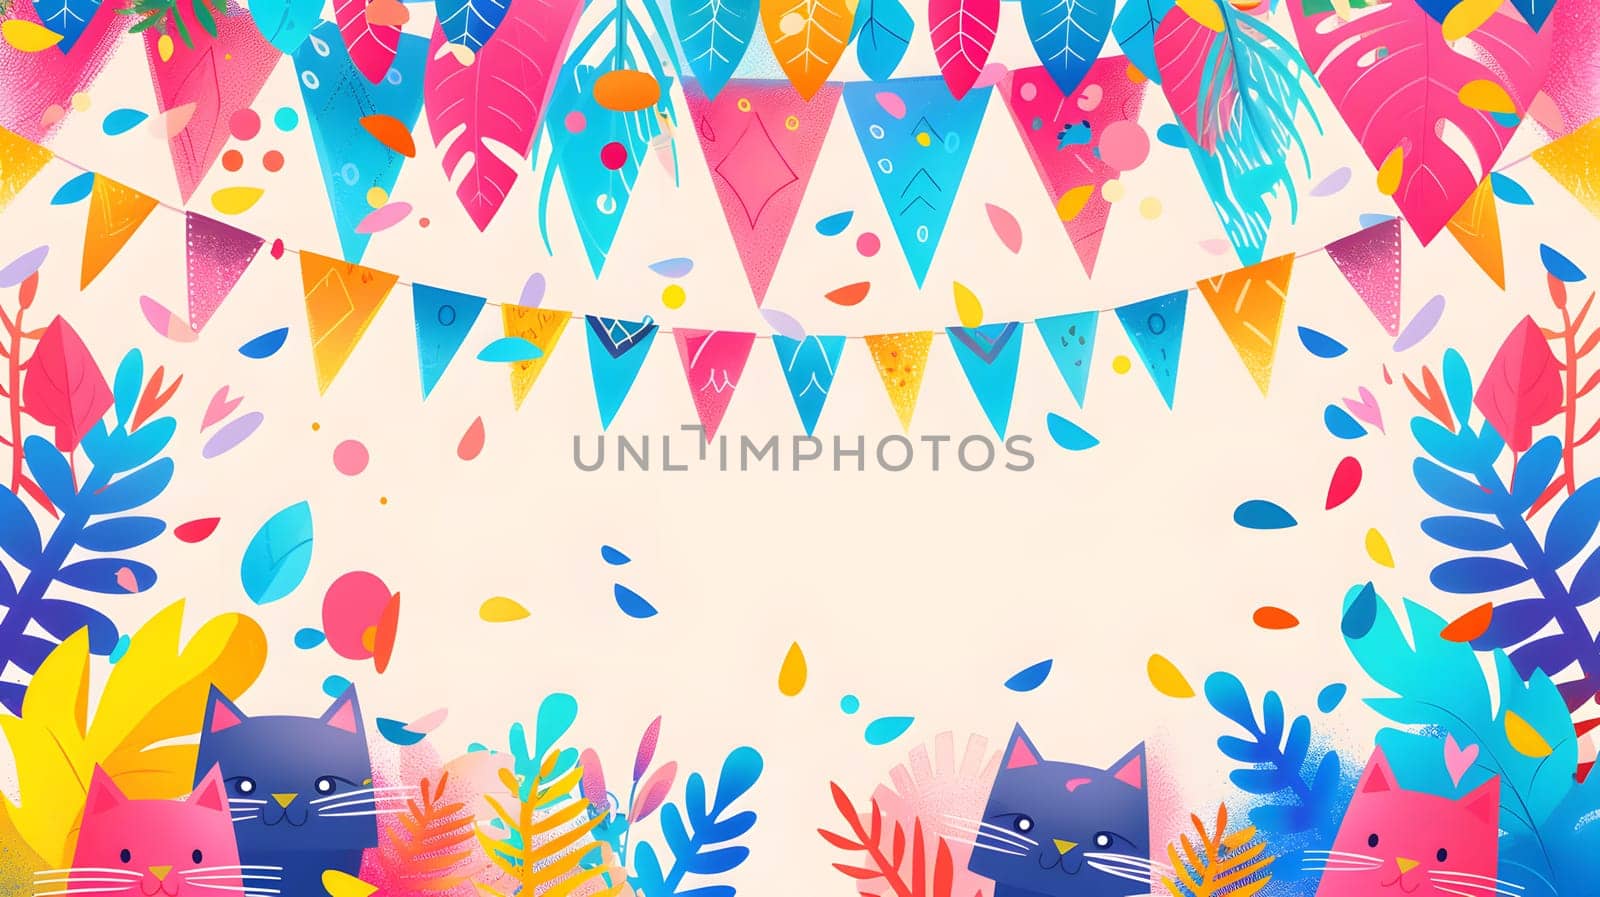 Colorful background with flags, leaves, and cats in a symmetric pattern by Nadtochiy